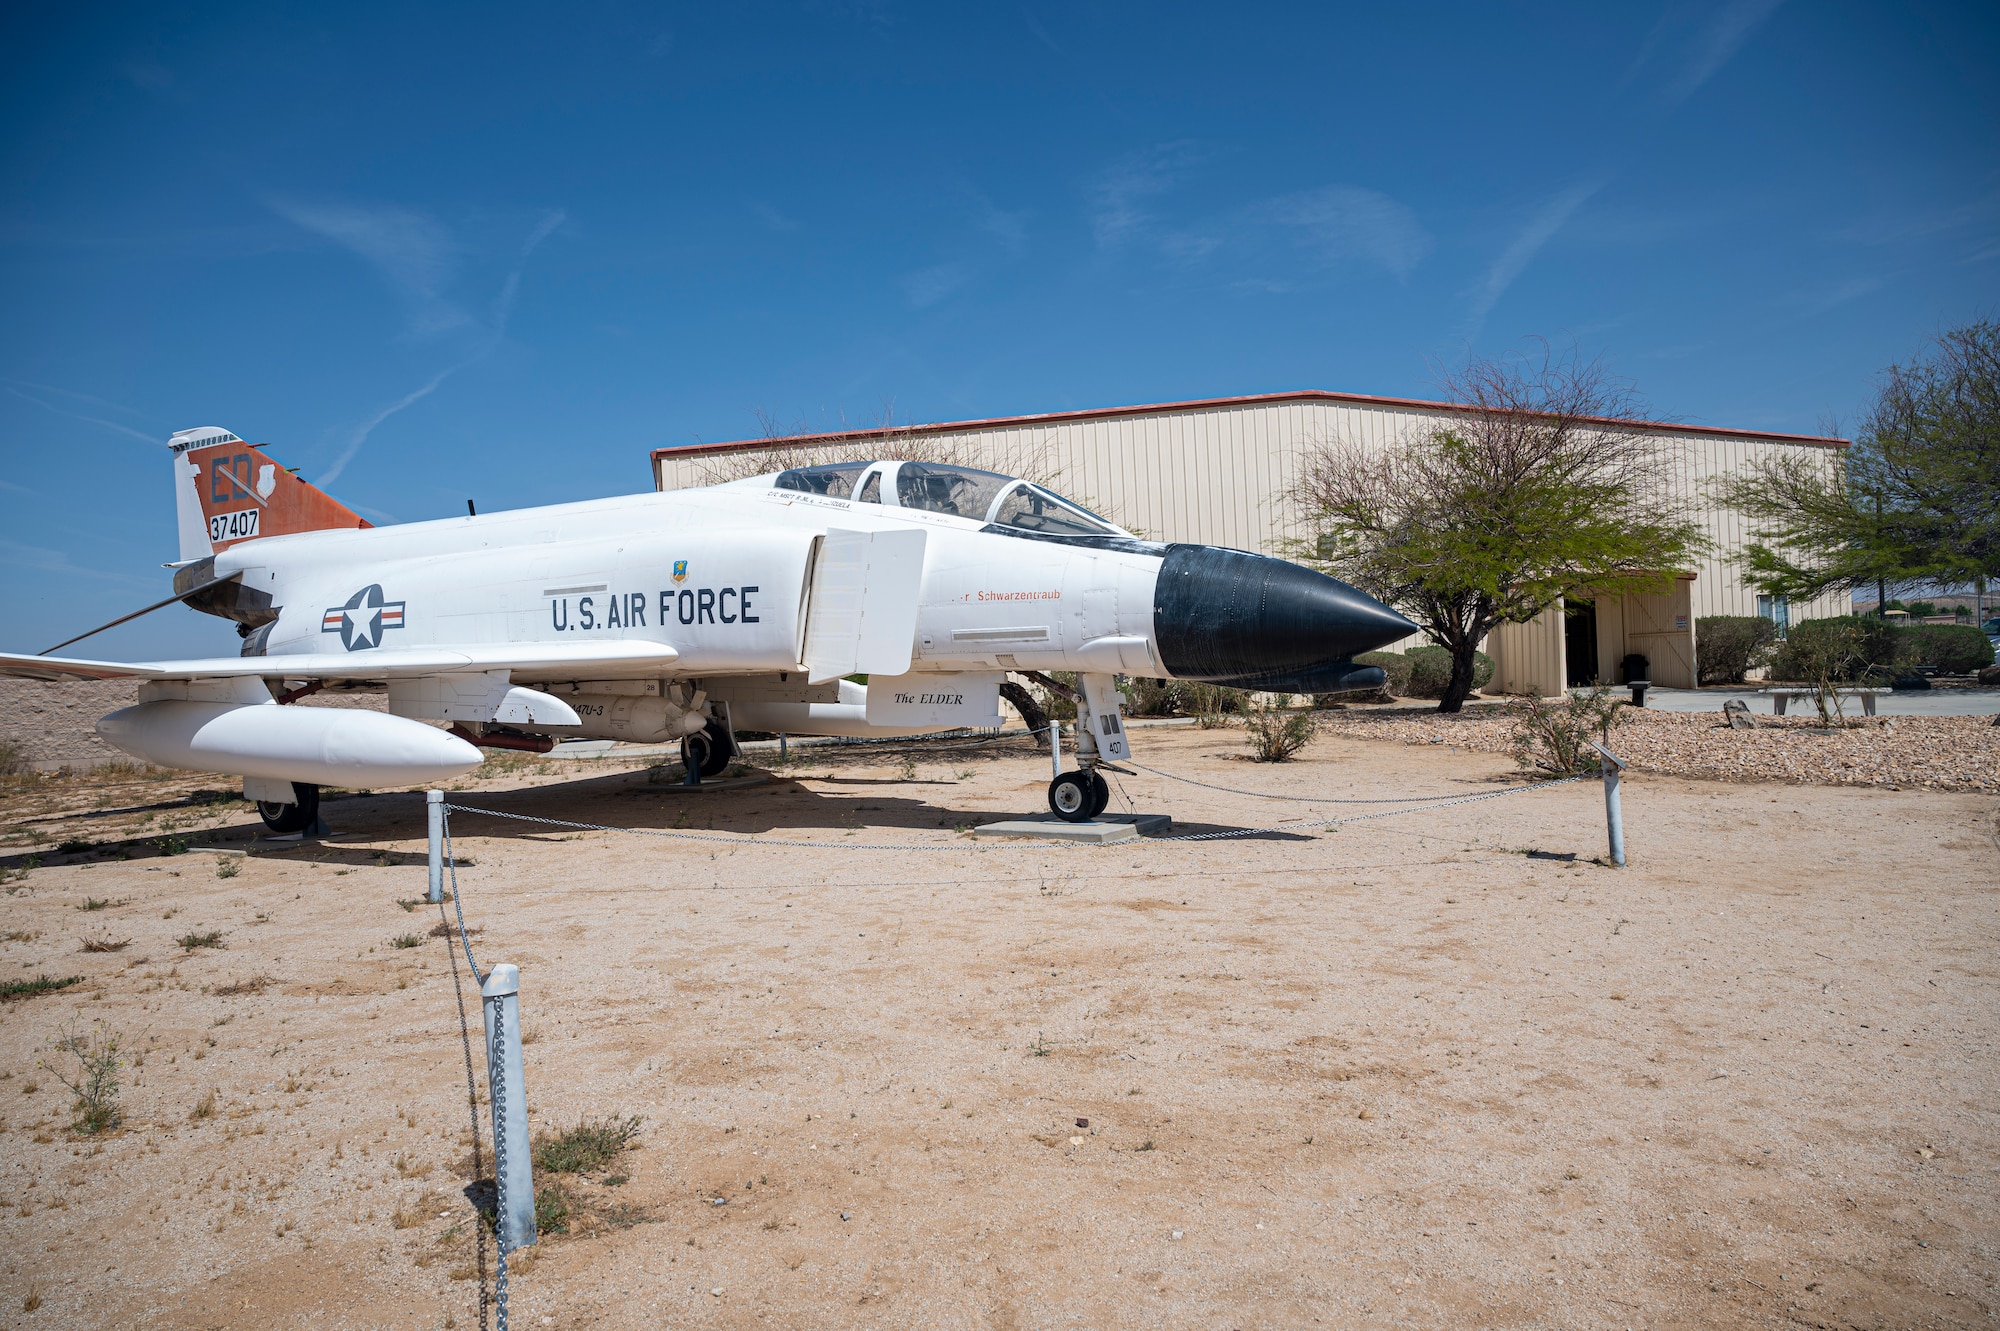 The Air Force Flight Test Museum at Edwards Air Force Base is excited to welcome people back to explore the rich history this test base has to offer.